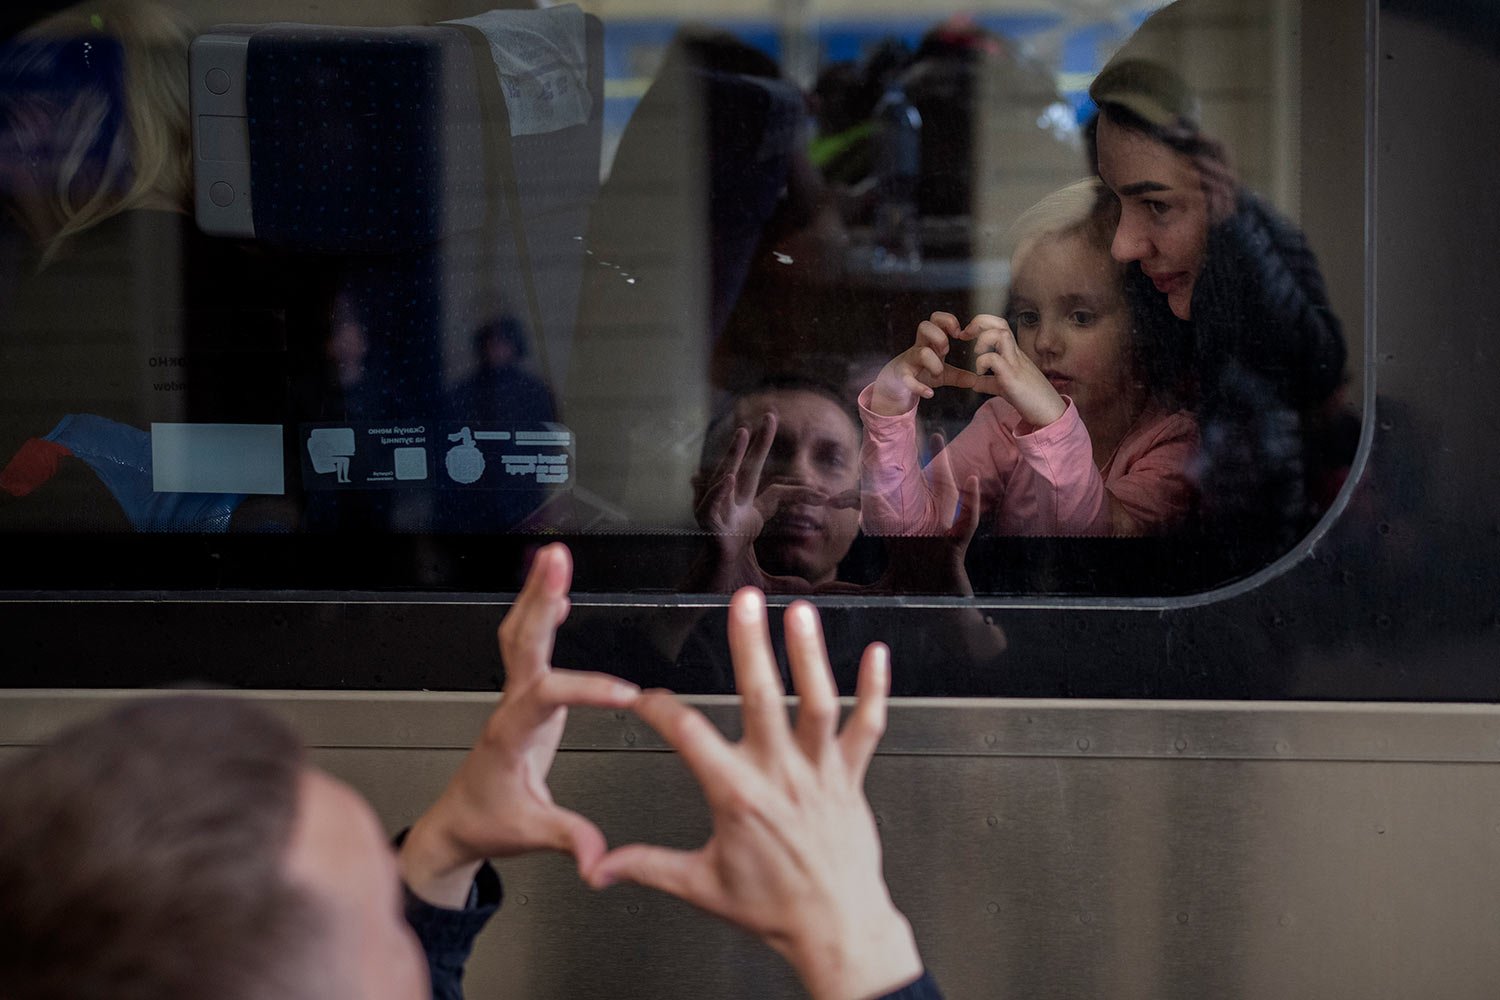  Ukrainian Nicolai, 41, says goodbye to his daughter Elina, 4, and his wife Lolita, on a train bound for Poland fleeing from the war at the train station in Lviv, western Ukraine, Friday, April 15, 2022. (AP Photo/Emilio Morenatti) 